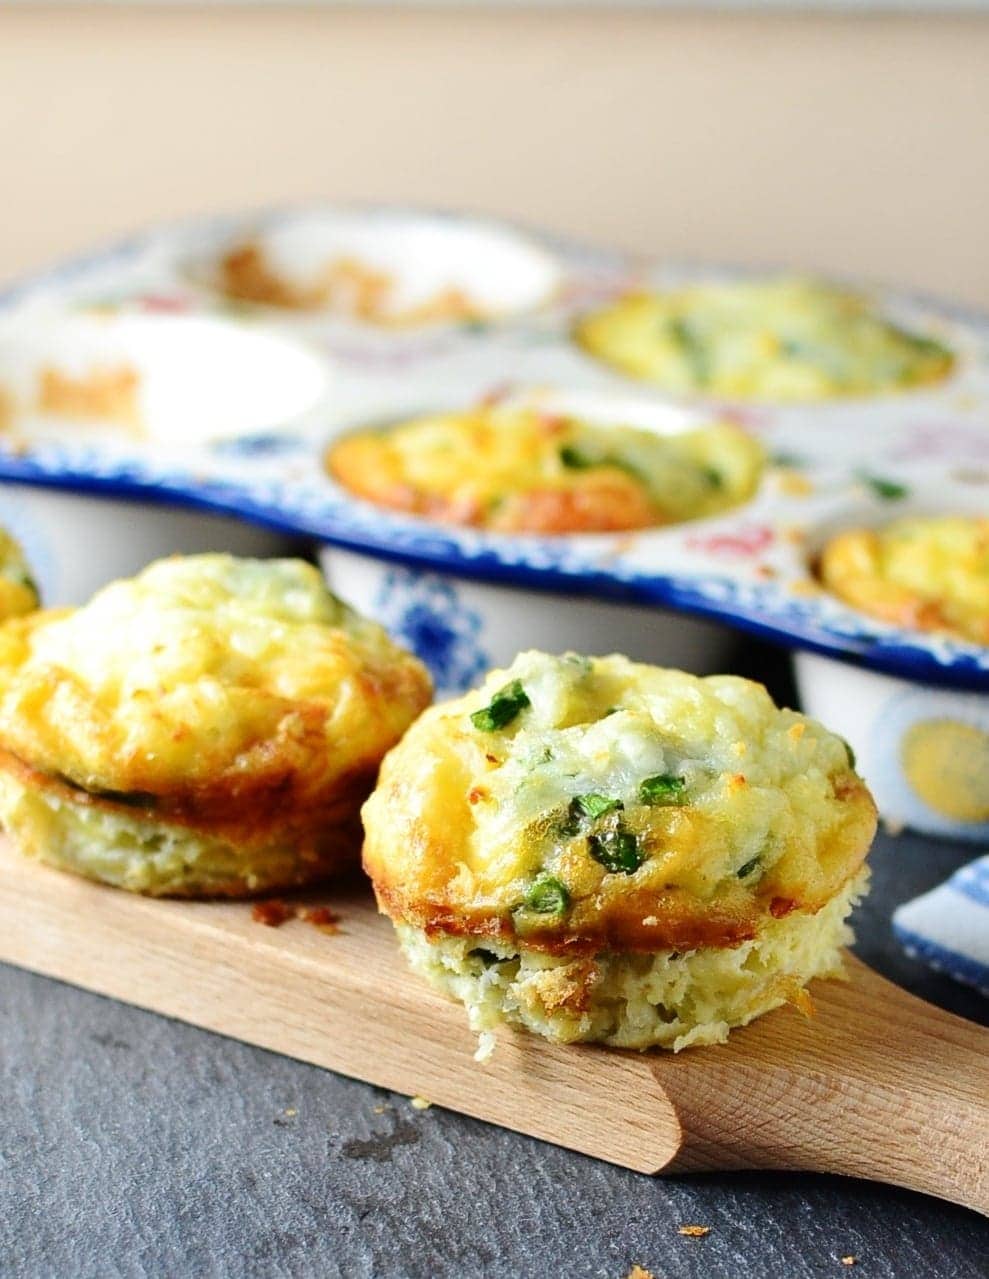 Potato asparagus frittata muffins on wooden board with ceramic muffin tin in background.